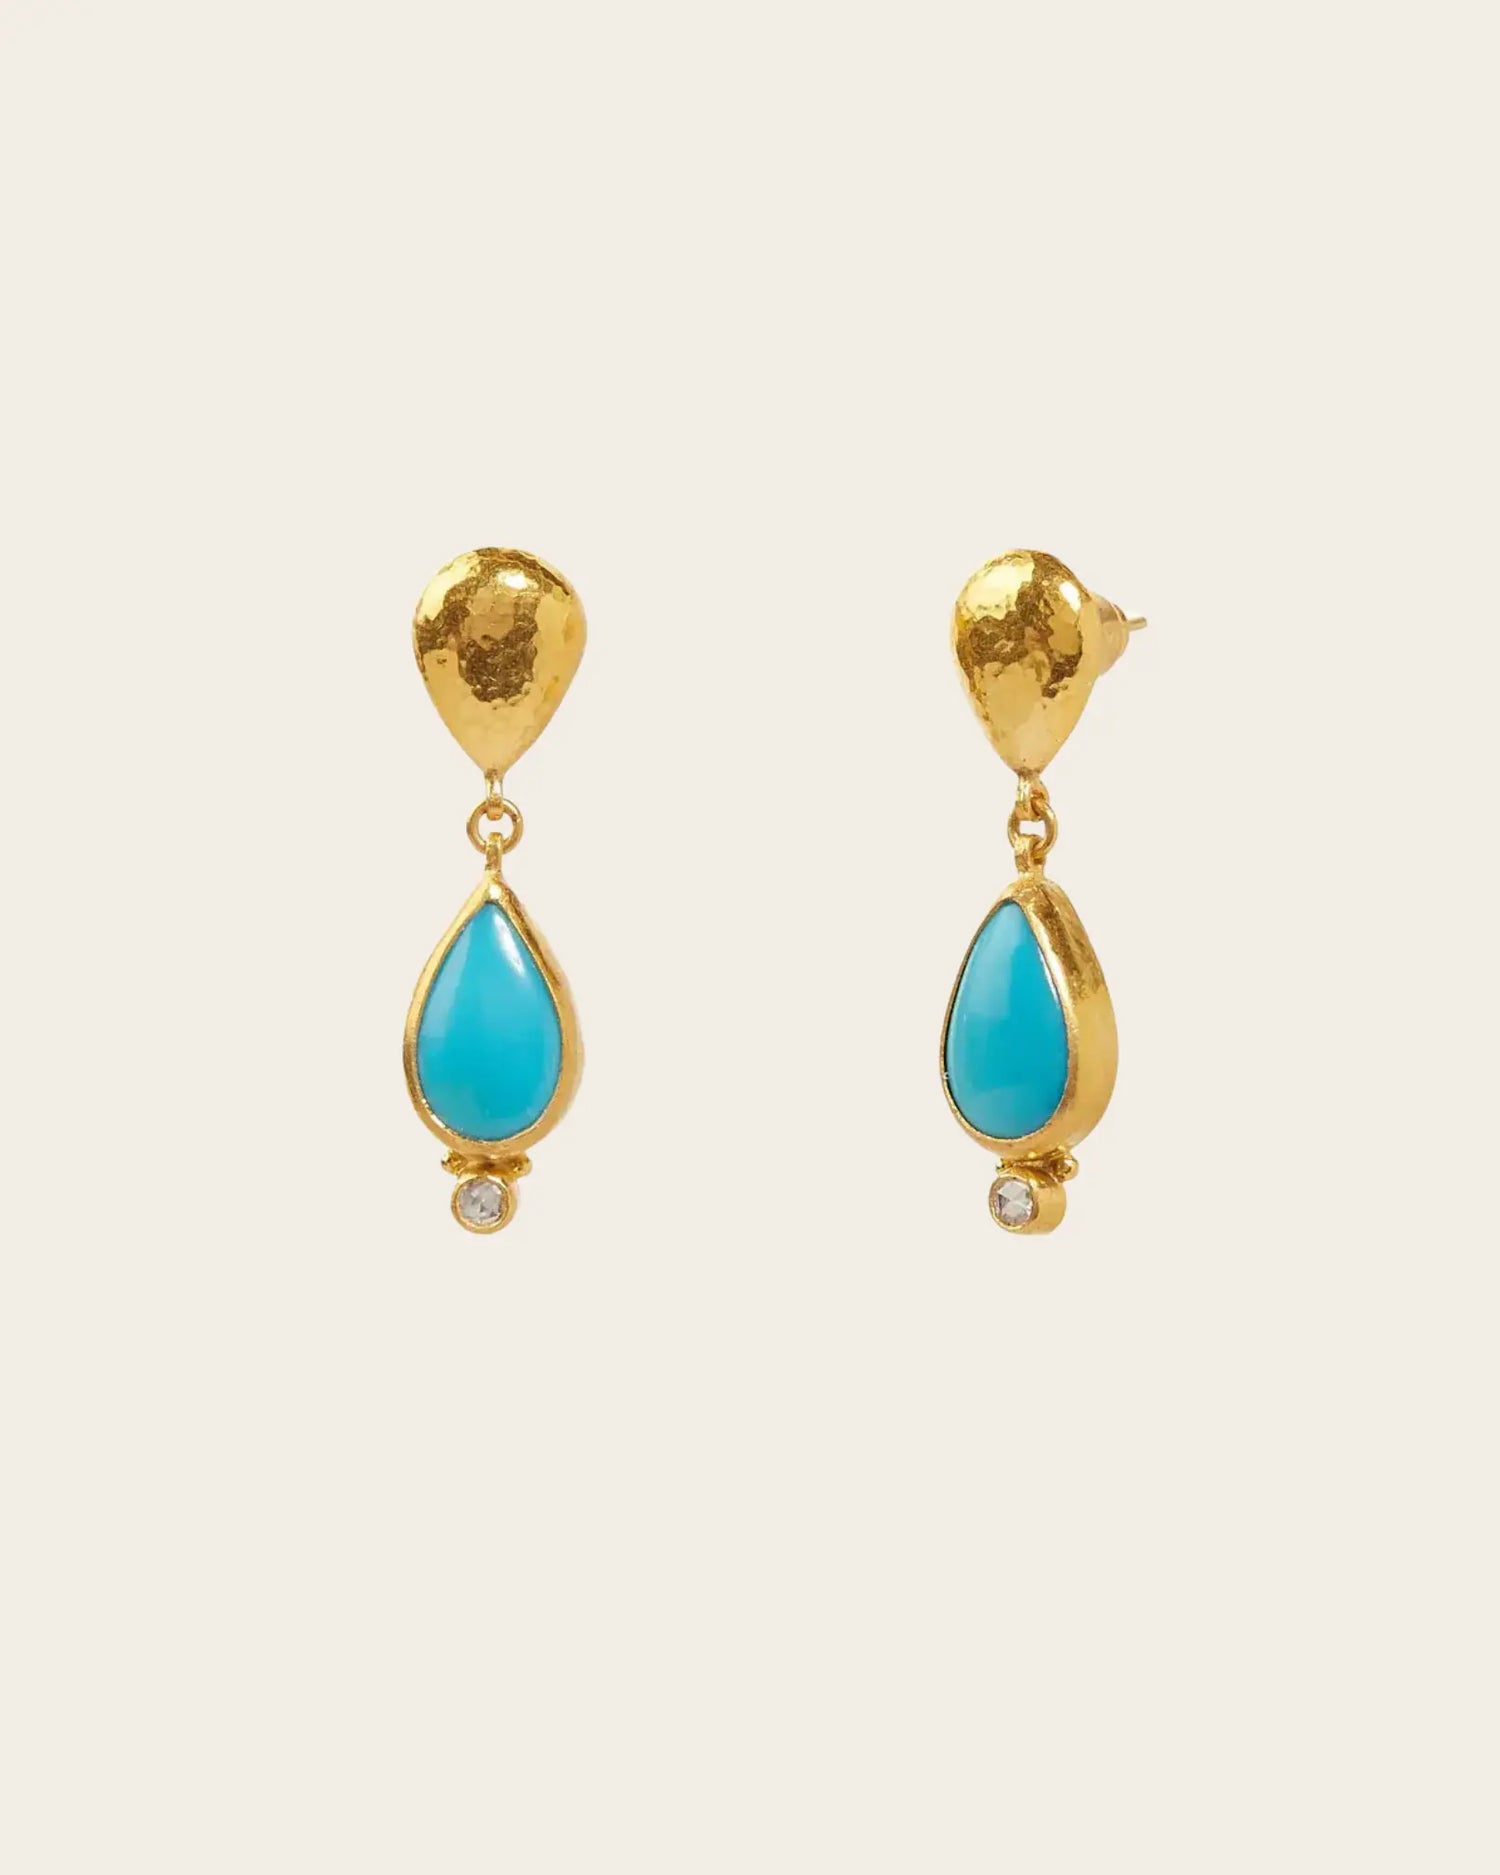 GURHAN Rune Gold Single Drop Turquoise and Diamond Earrings GURHAN Rune Gold Single Drop Turquoise and Diamond Earrings Gurhan Gurhan  Squash Blossom Vail